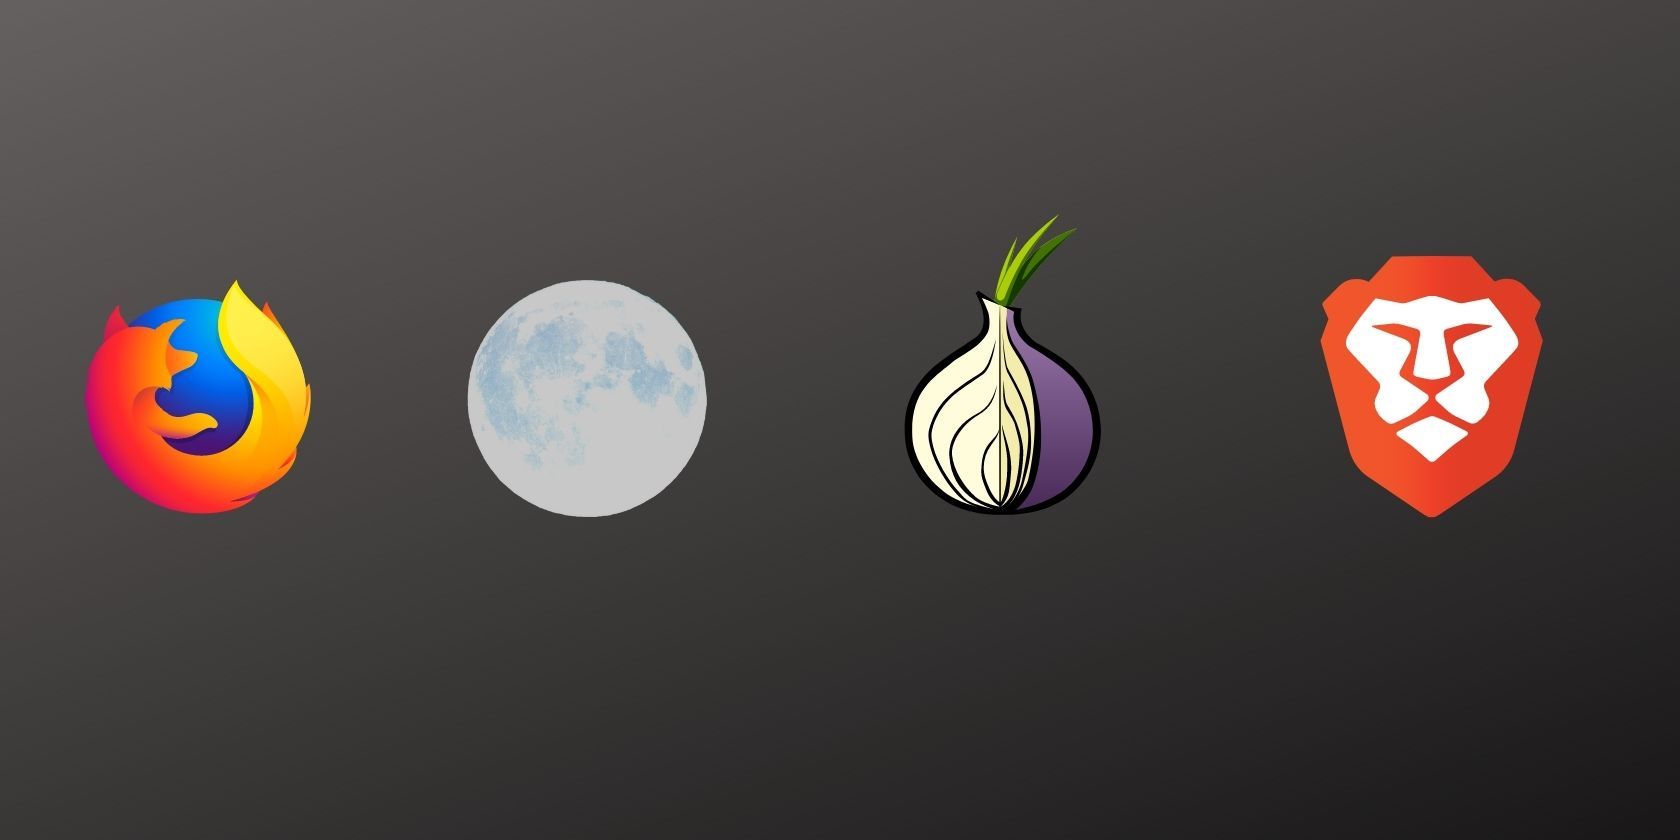 Logos of Firefox, Pale Moon, Tor and Brave browser are seen on a black background